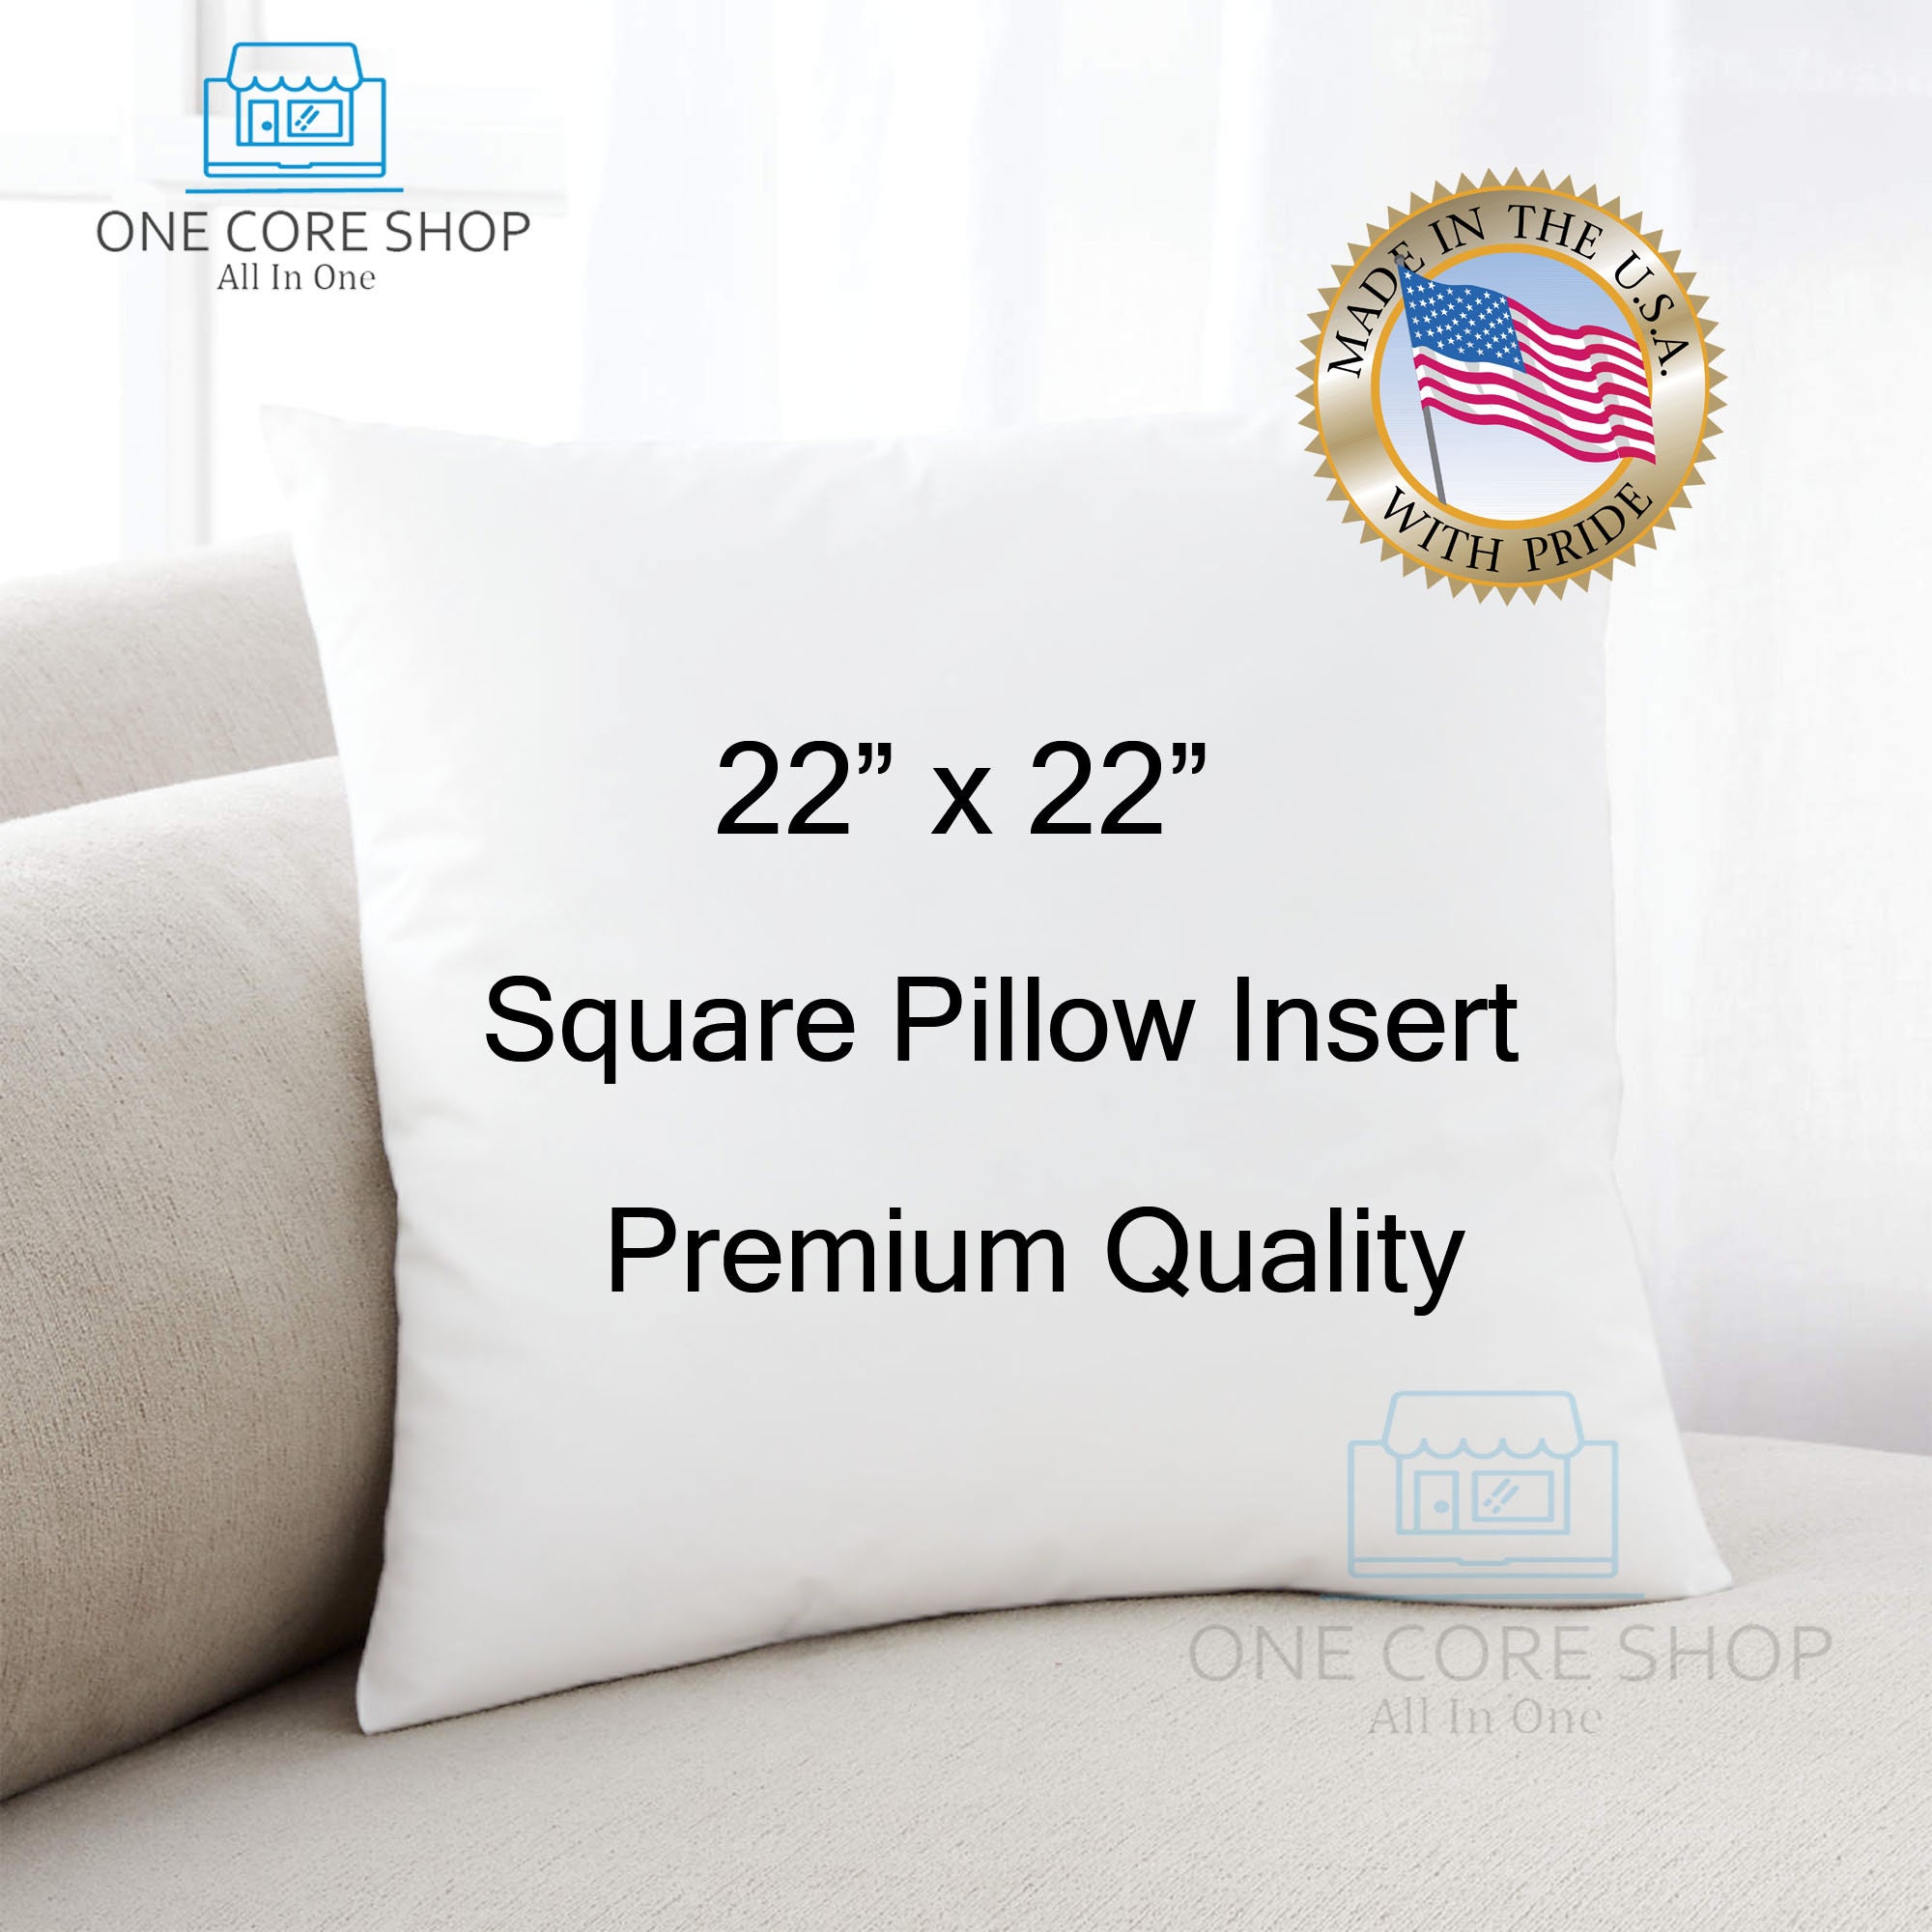  22X22 Decorative Throw Pillow Insert, Down and Feathers Fill,  100% Cotton Cover 233 Thread Count, Square Pillow Insert - Made in USA  (Single) : Home & Kitchen